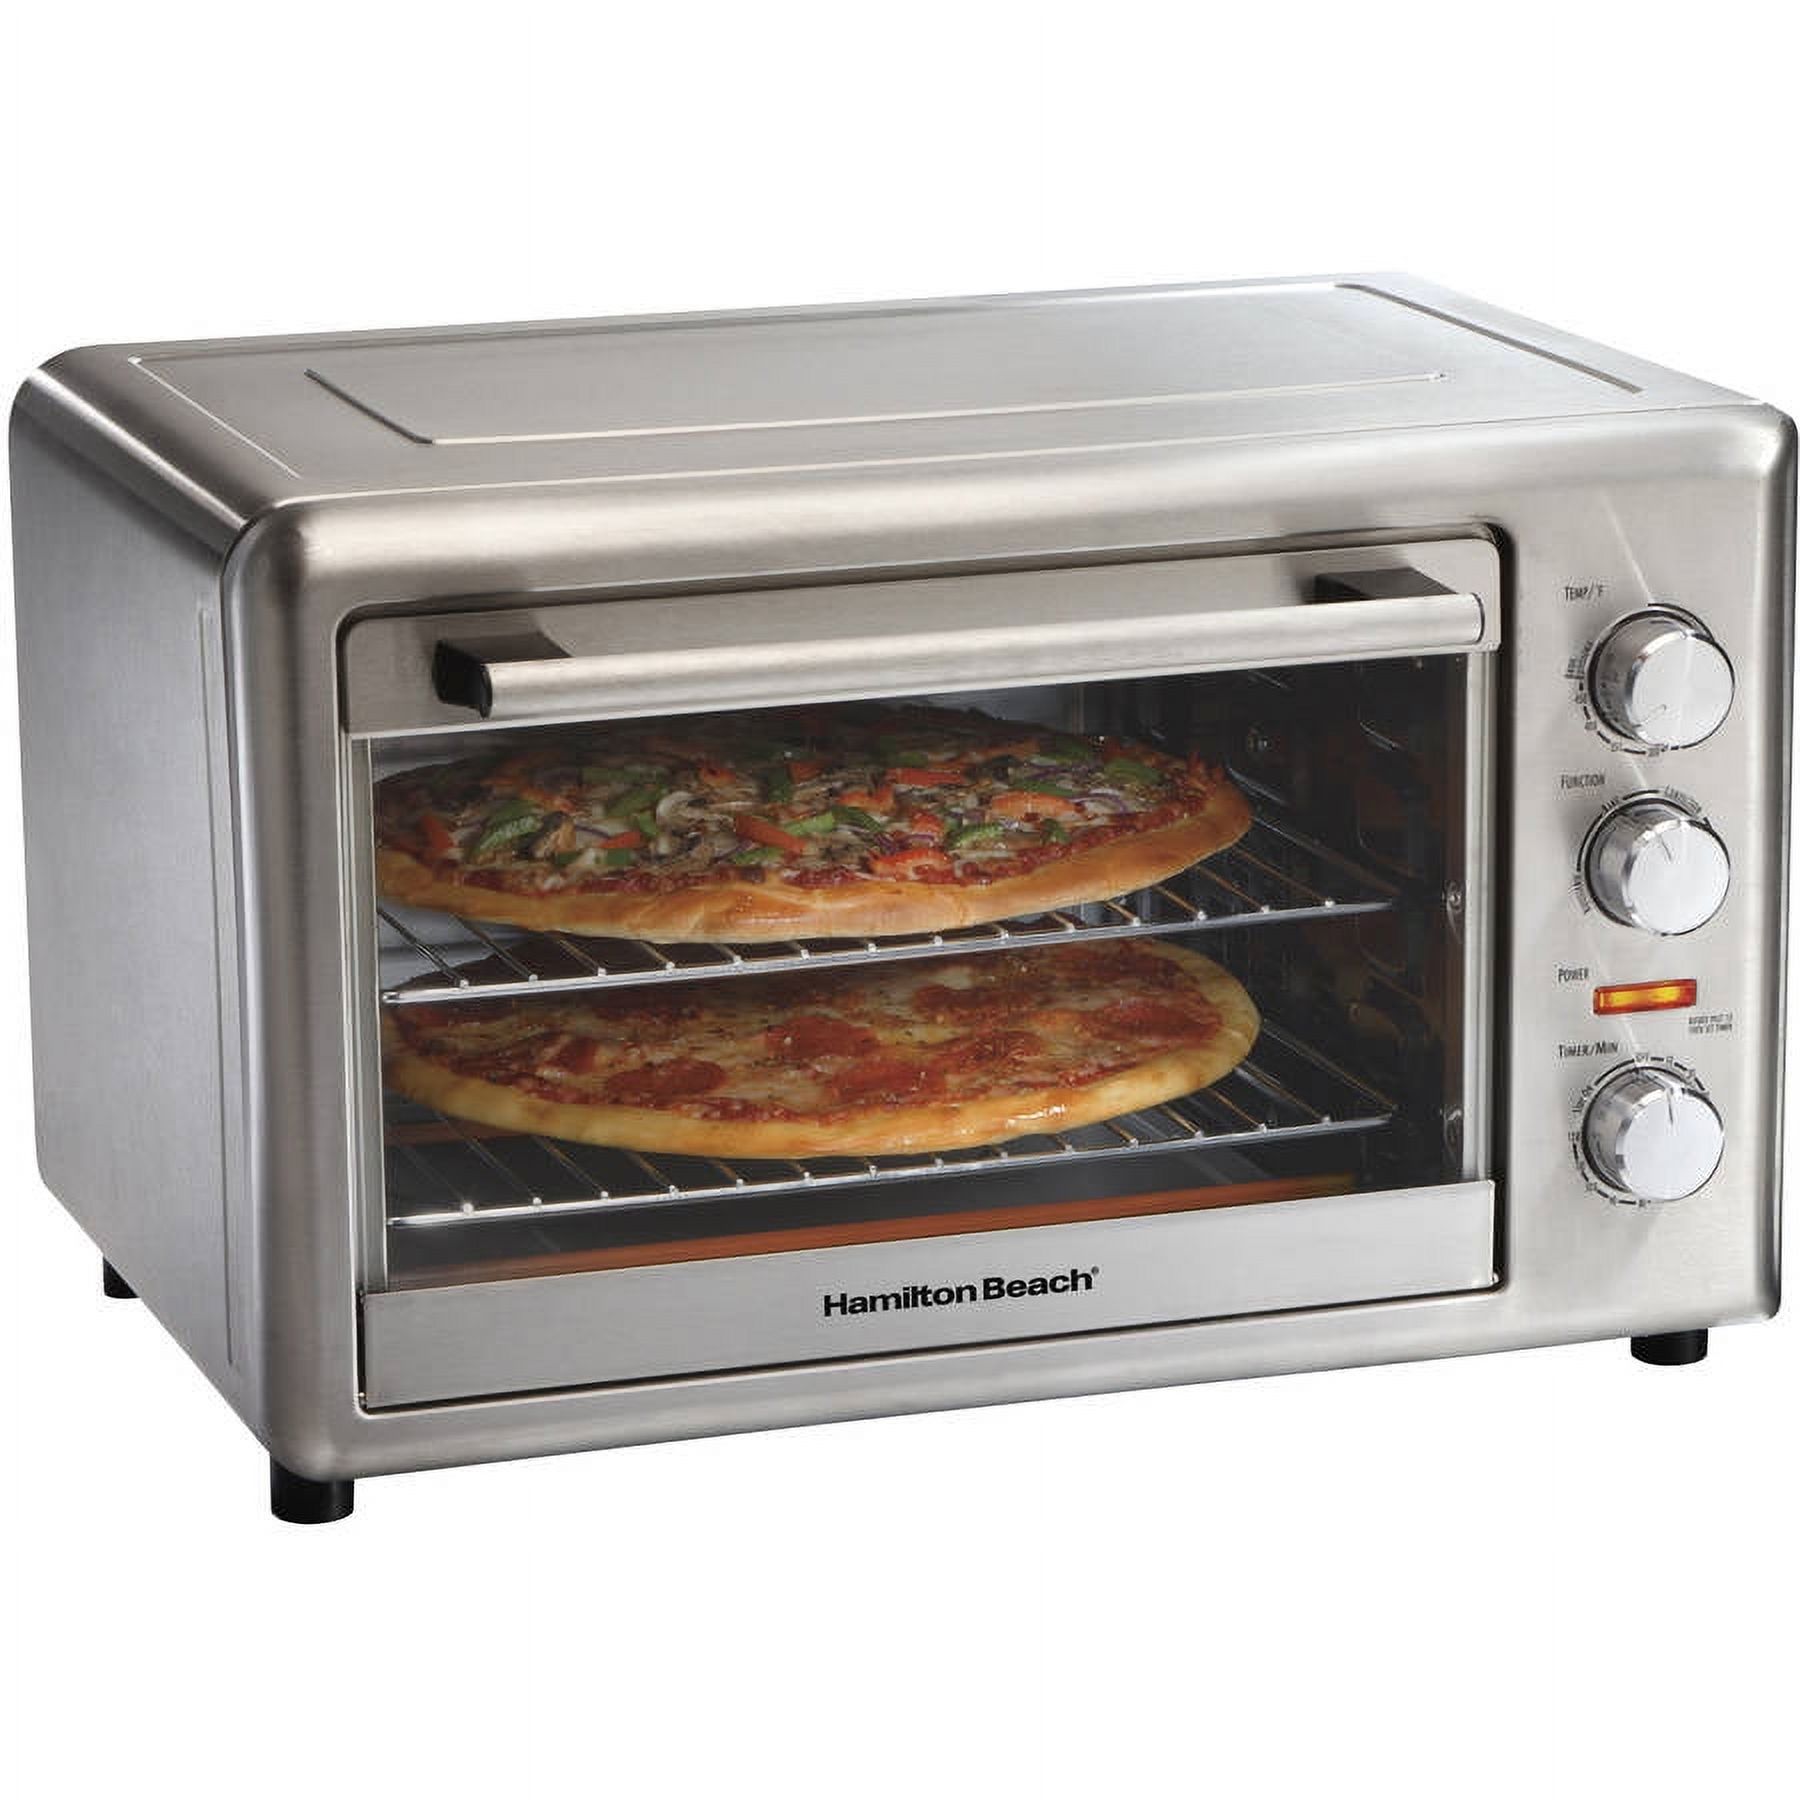 Hamilton Beach Countertop Oven with Convection and Rotisserie, Baking, Broil, Extra Large Capacity, Stainless Steel, 31103 - image 1 of 6